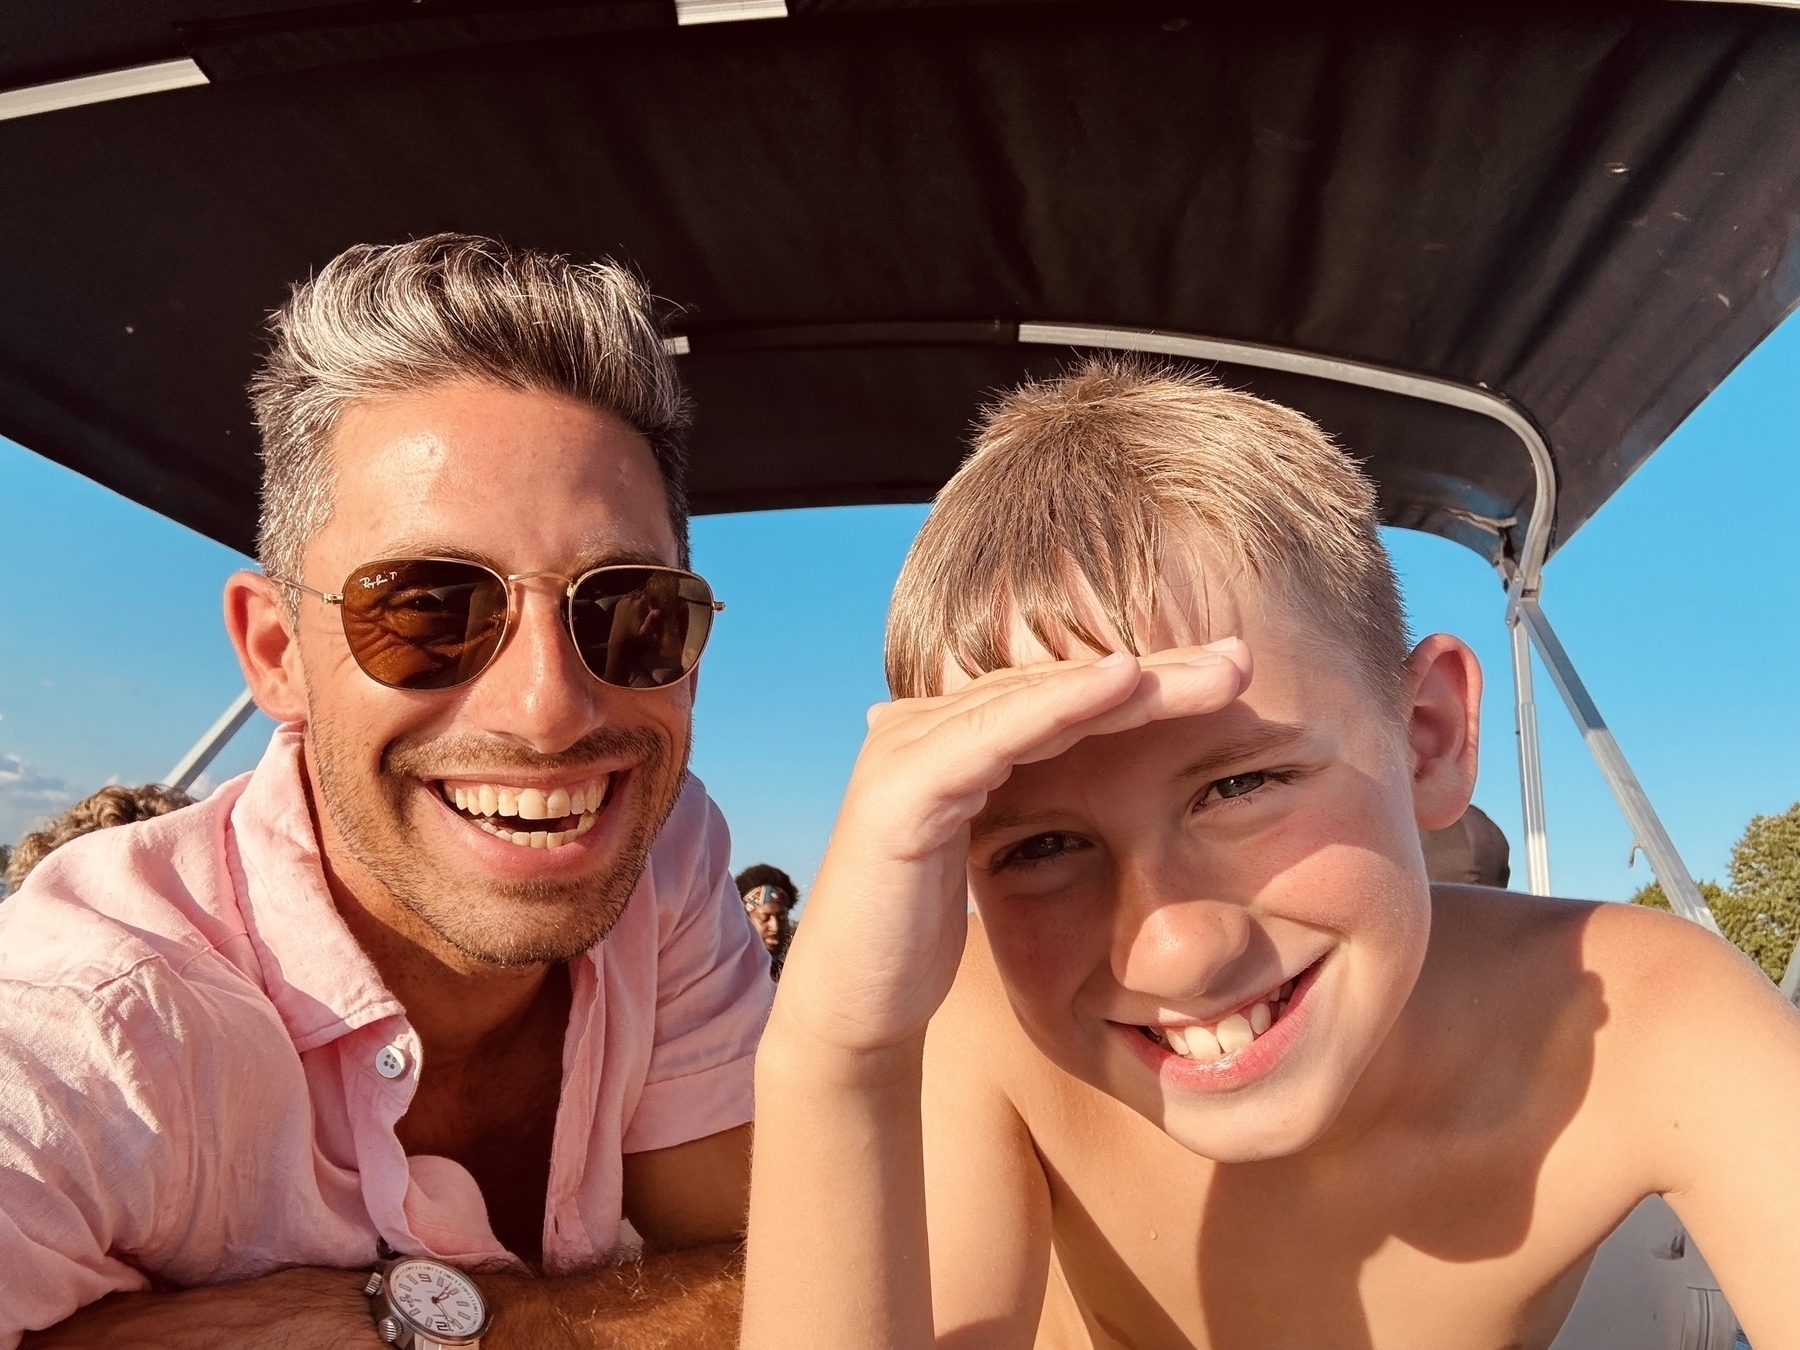 A man (Aaron) and a child (Mozzie), both smiling and appearing happy, are enjoying a sunny day under a canopy of a pontoon boat.